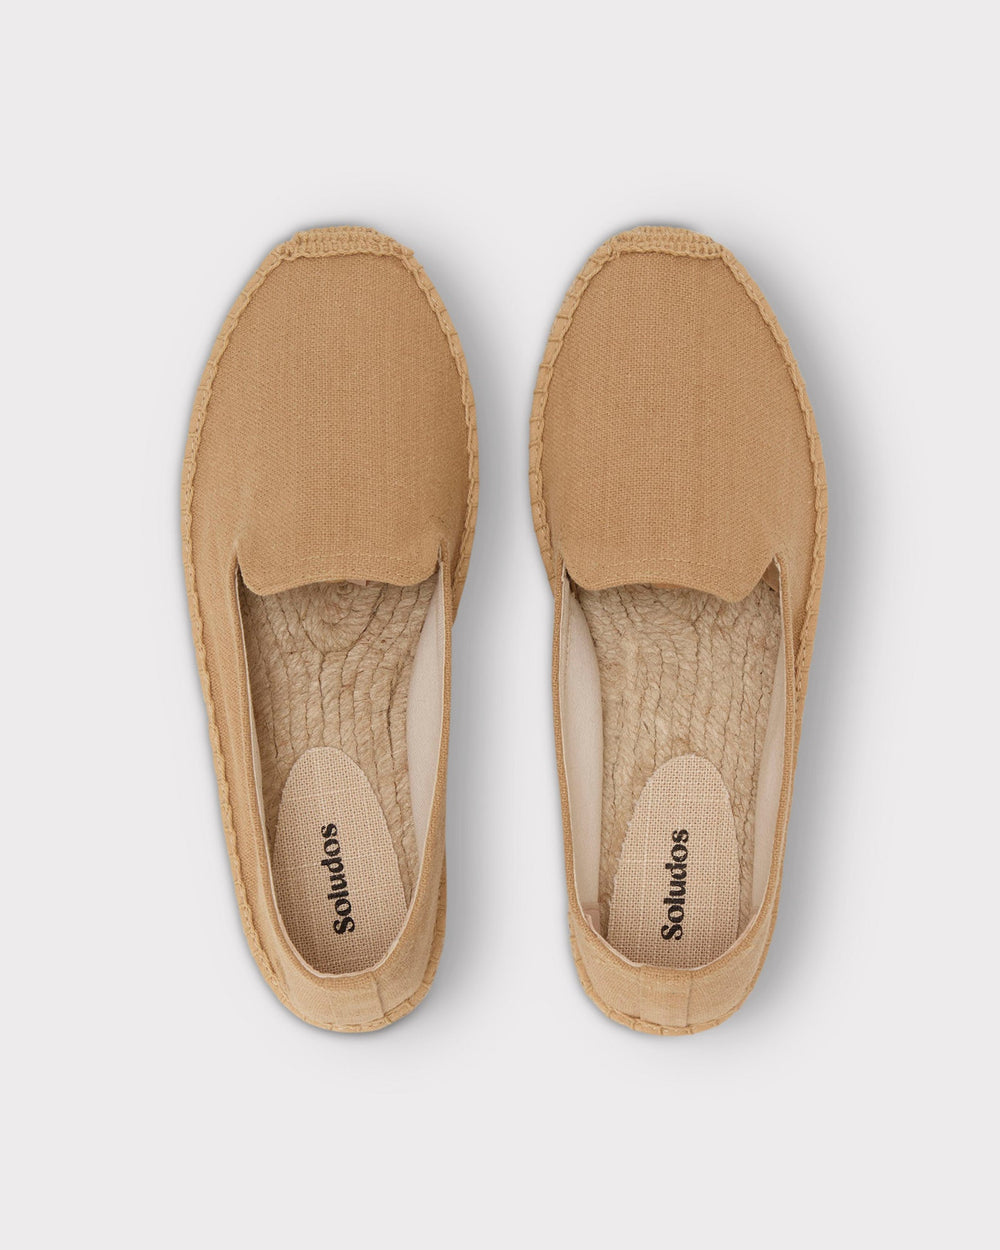 The Seville Smoking Slipper Platform - Classic - Taupe - Women's Espadrilles - Taupe - Soludos -